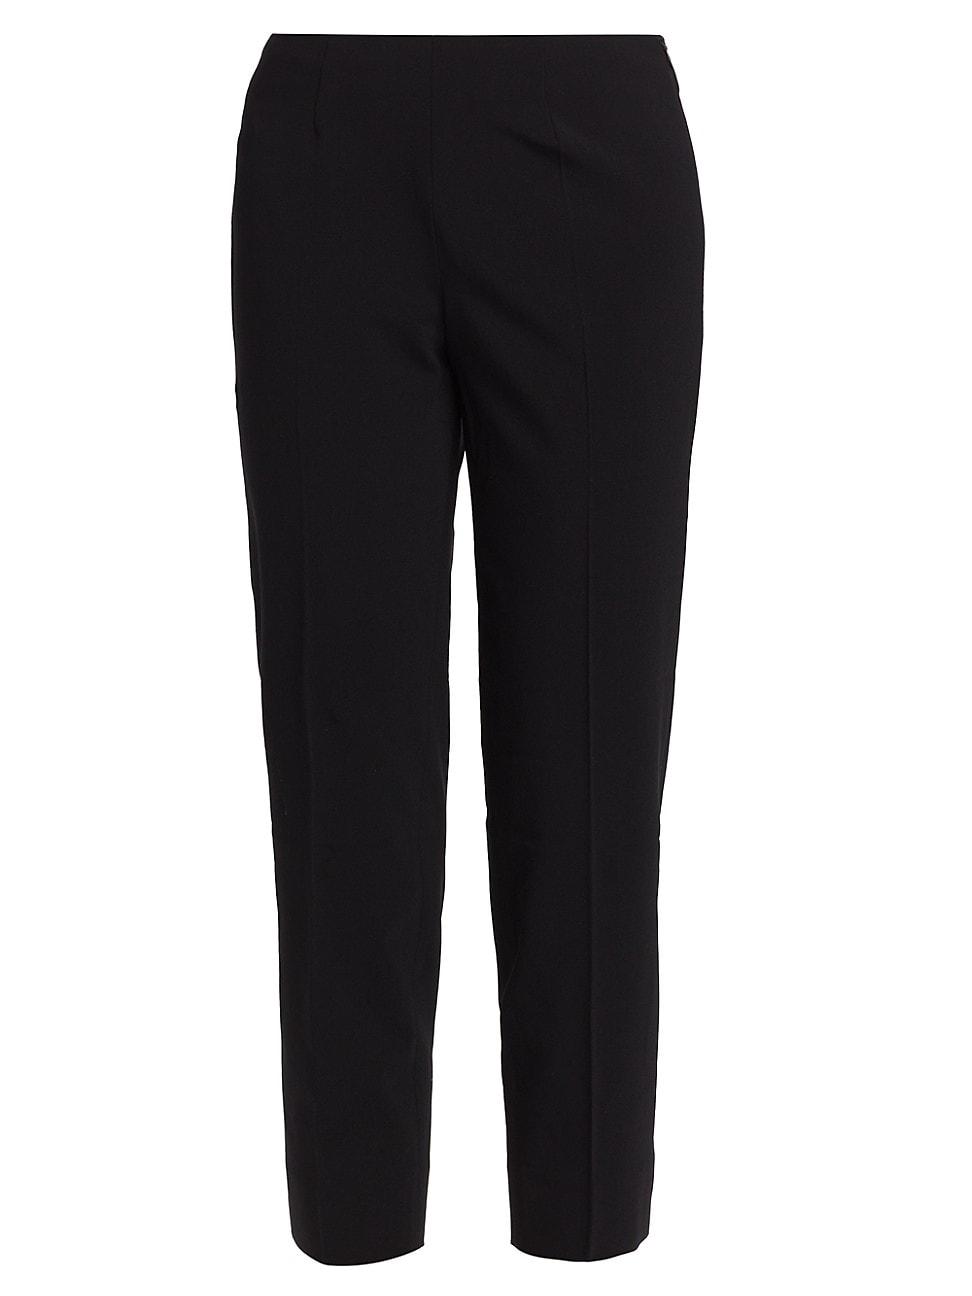 Piazza Sempione Audrey Cropped Stretch Pants in Black | Lyst